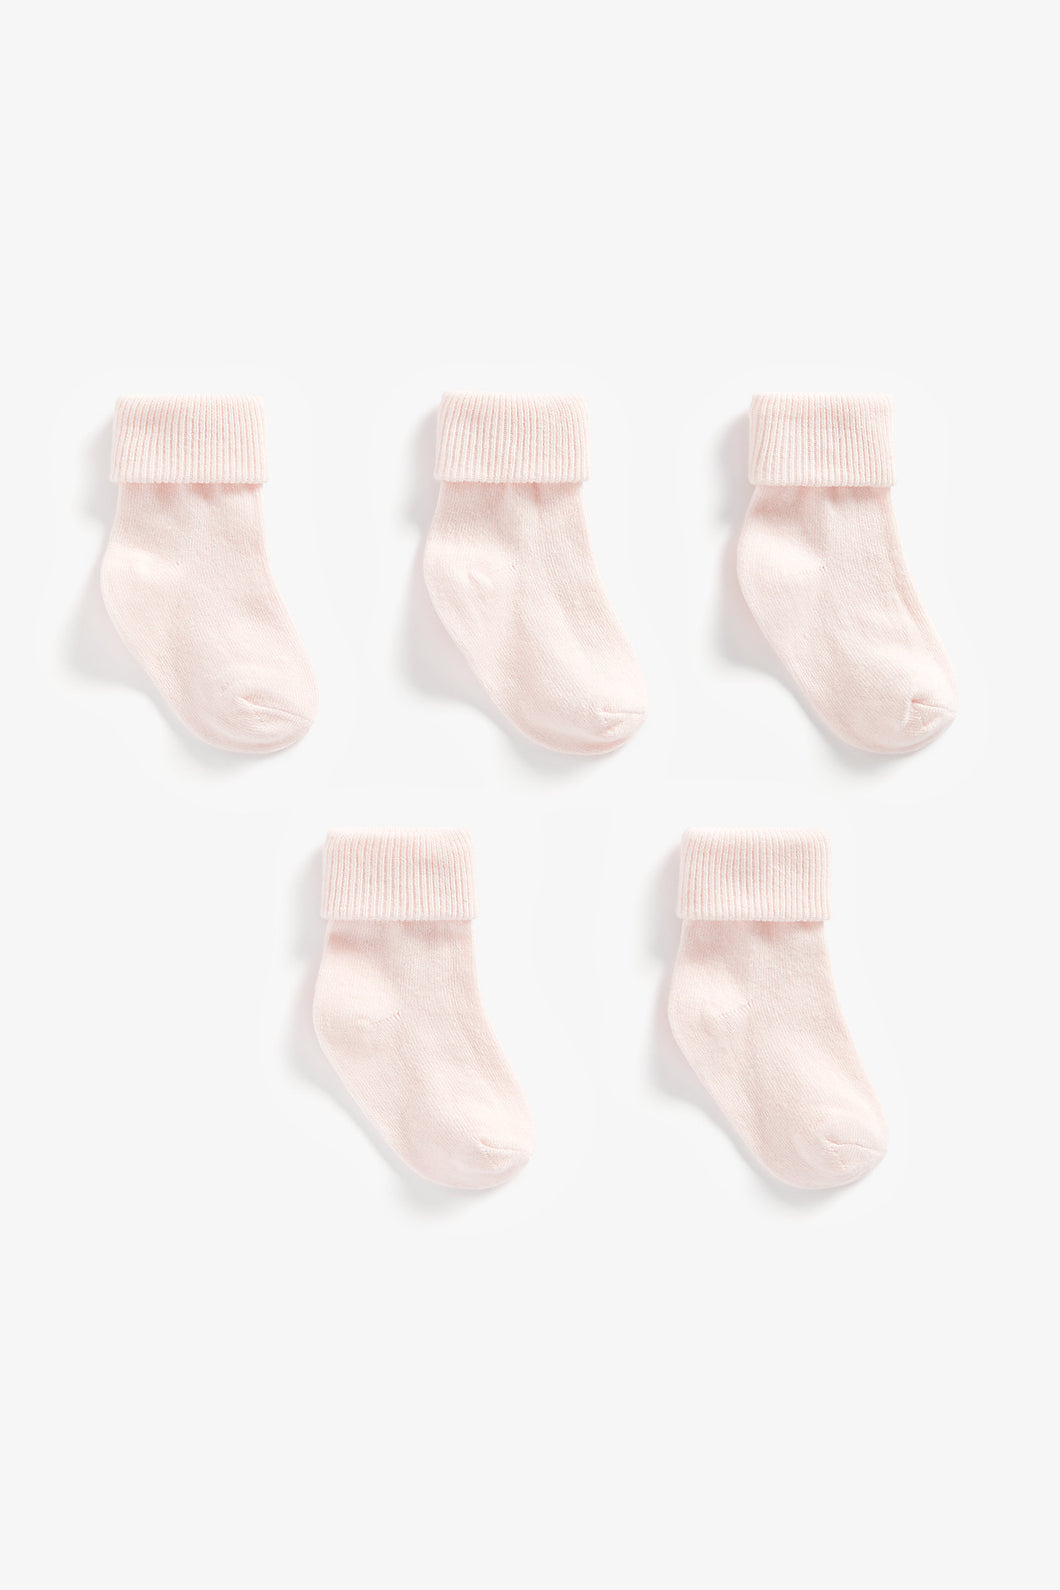 Mothercare Pink Turn-Over-Top Socks - 5 Pack